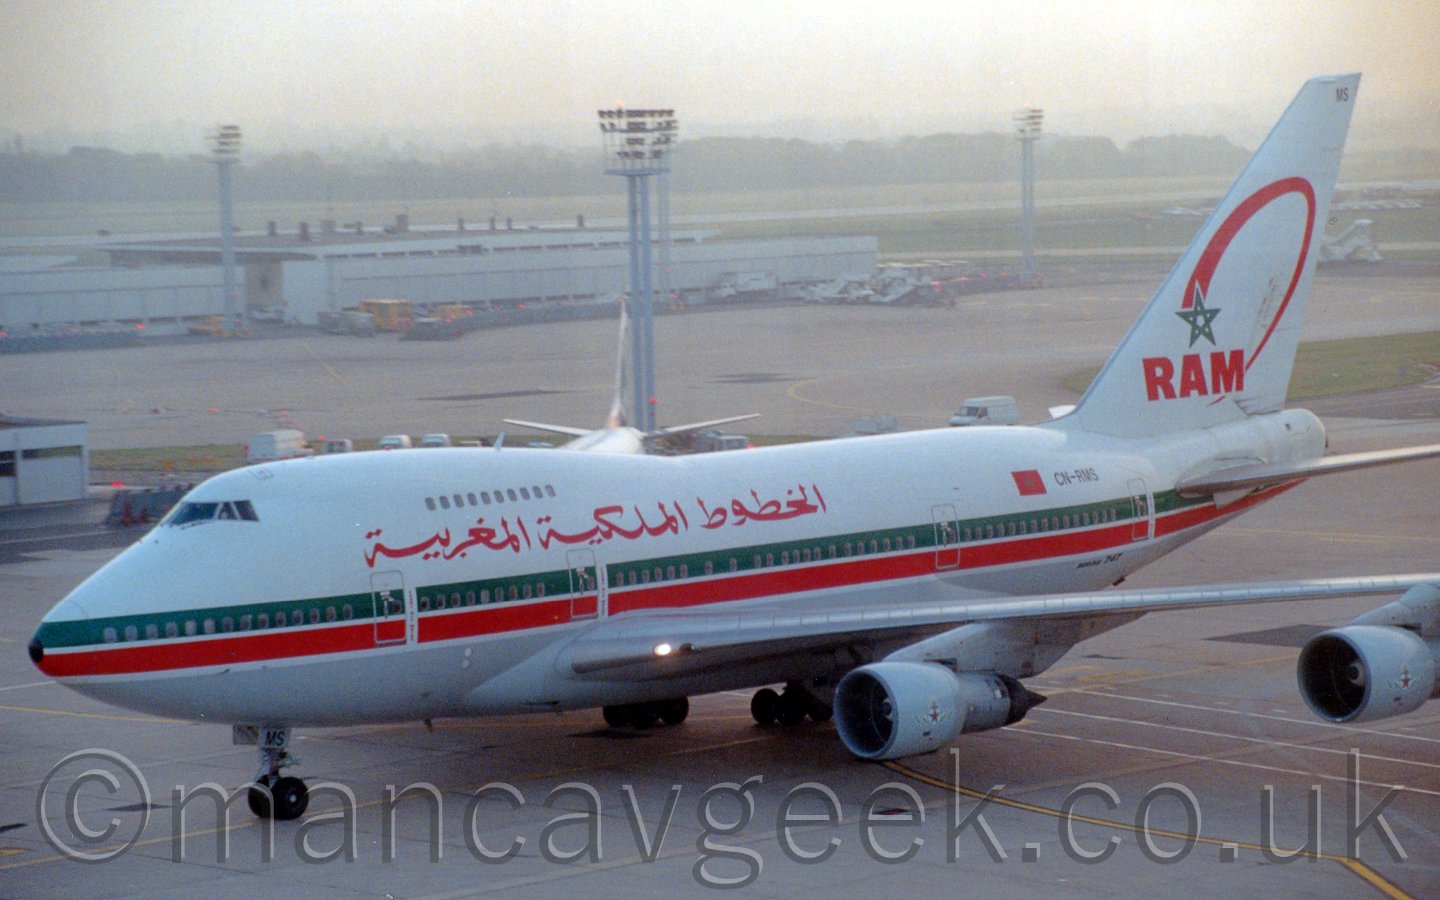 Side view of a very large 4 engined jet airliner taxiing from right to left. The plane is mostly white, with a grey belly, and thick green and red stripes running along the body from the nose, covering the lower deck passenger windows. There is a large, red piece of Arabic script on the upper forward fuselage, transliterating into English as Royal Air Morocco". On the tail, there is the green outline of a 5-pointed star, with a red src for a tail, above the red letters "RAM". In the background is a tall lighting pole looming over the plane, with a sprawling white building and a couple more lighting poles further back, with hazy trees in the background.